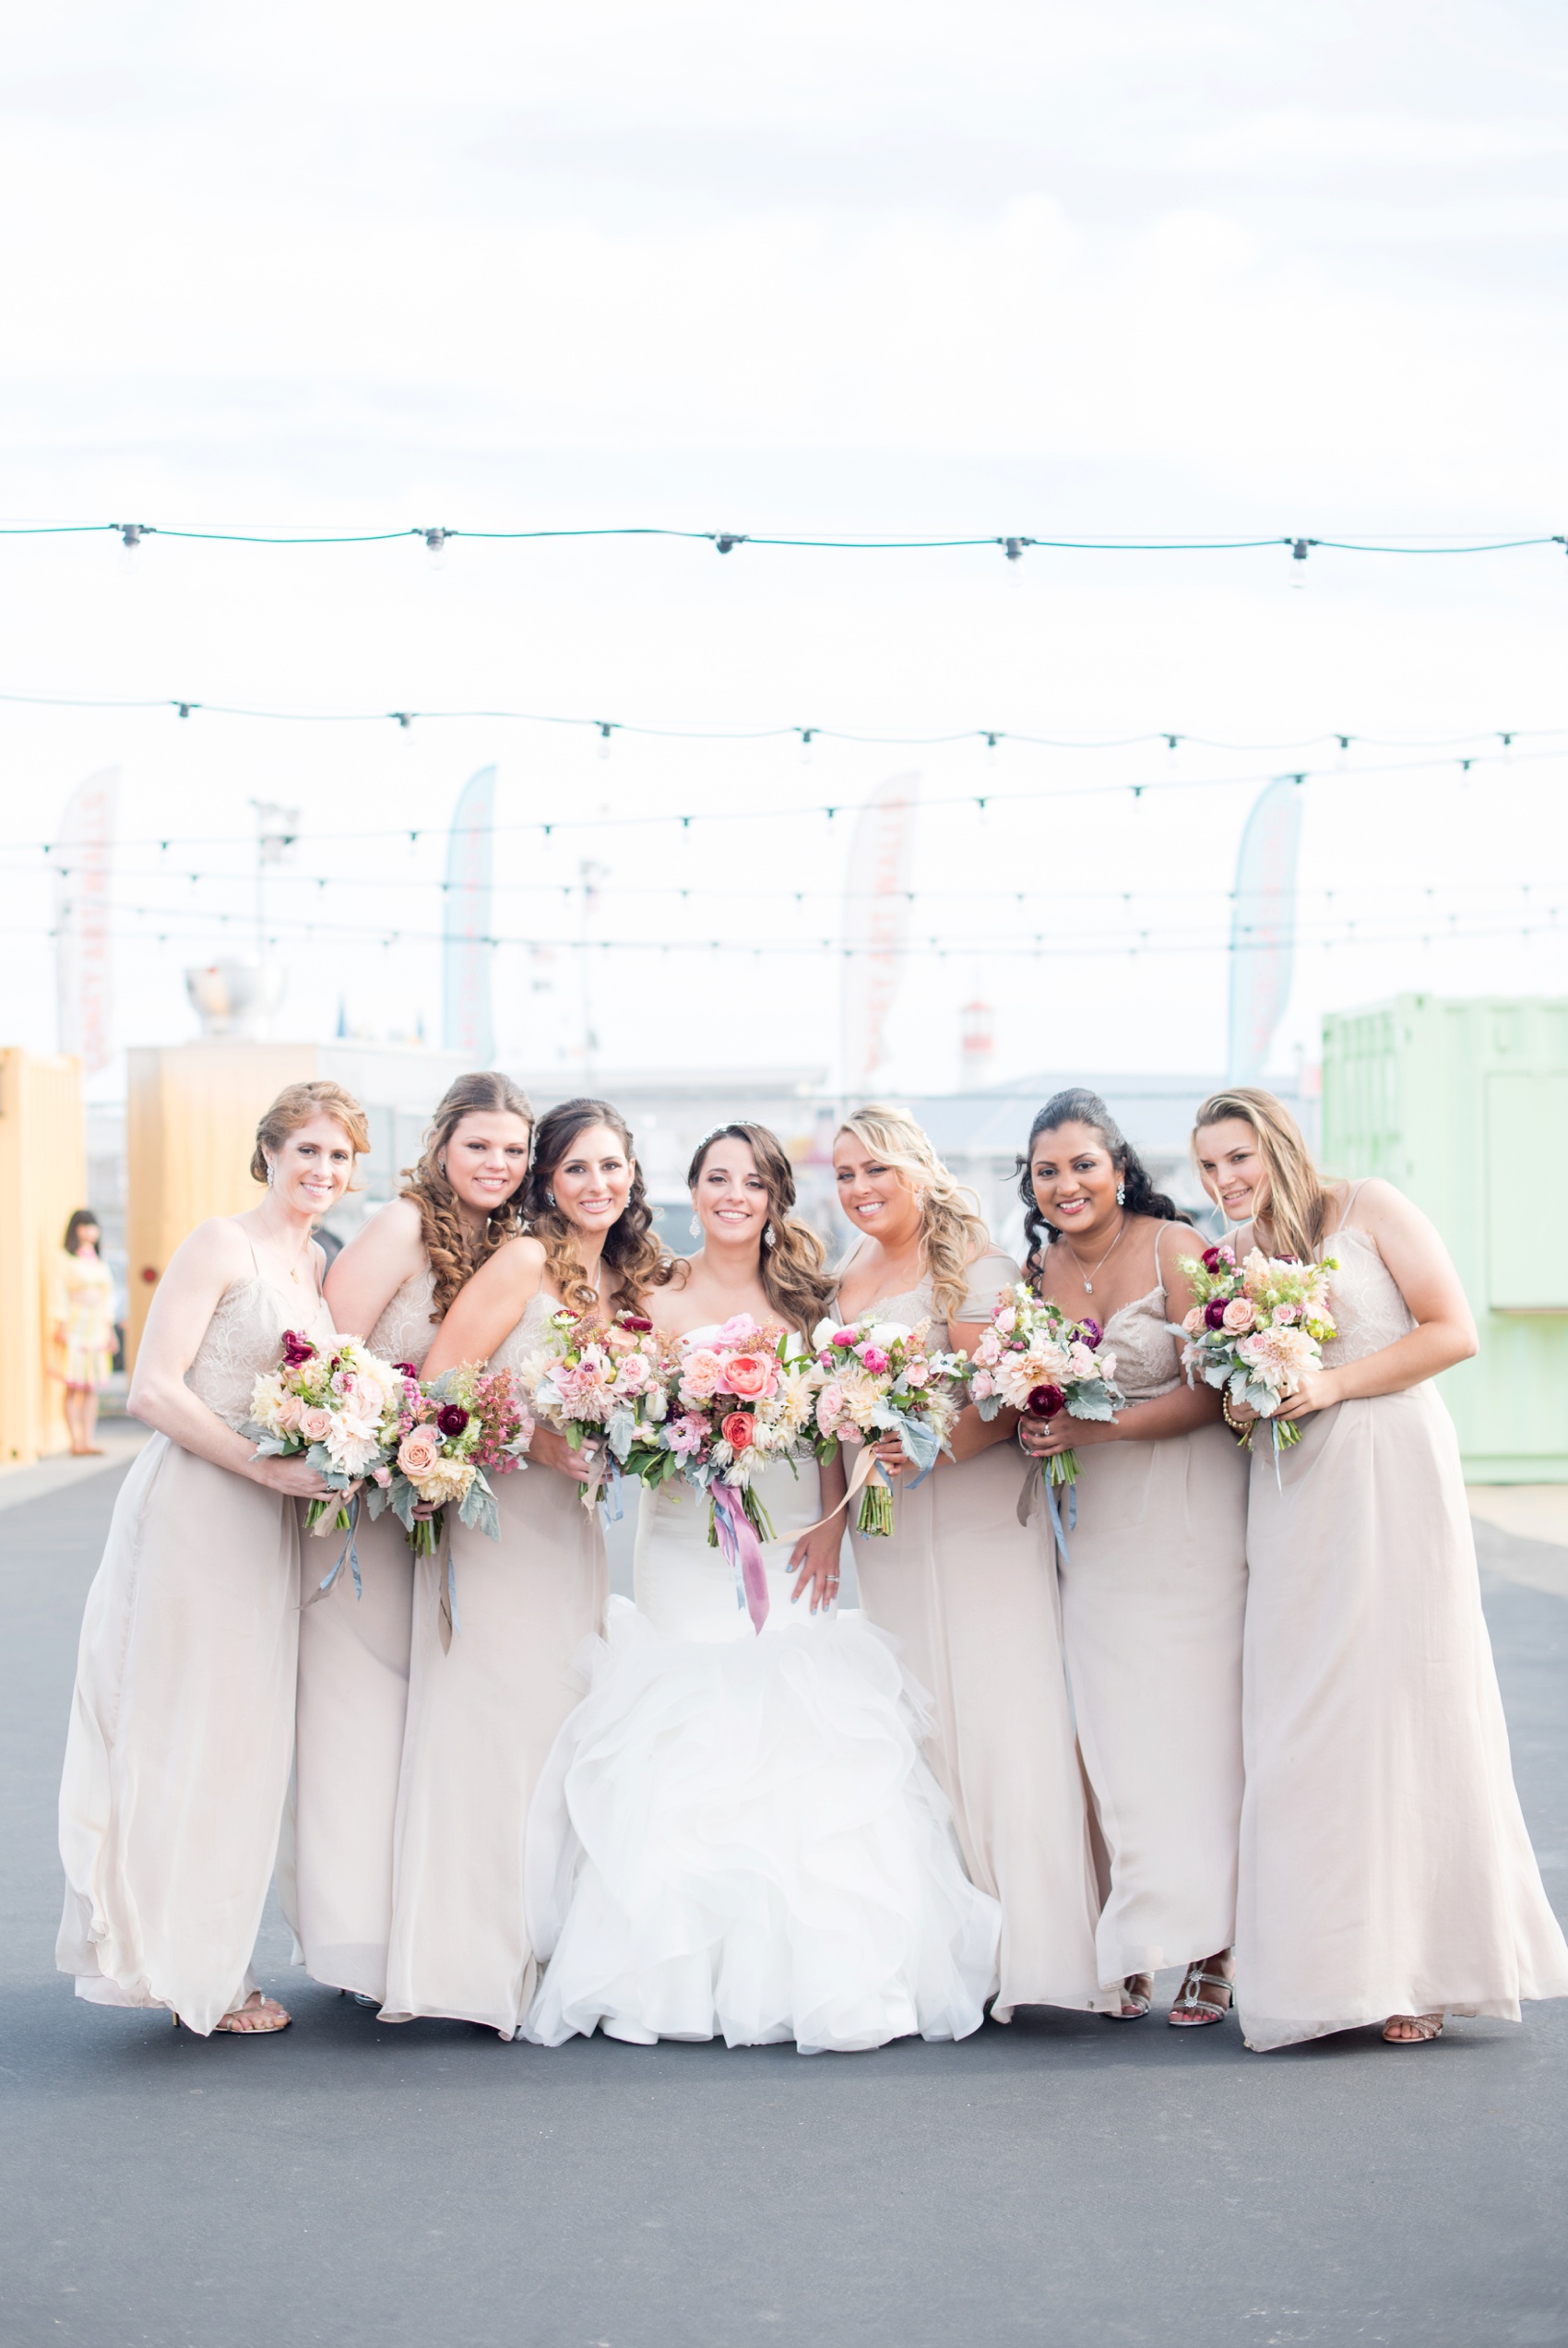 Coney Island colorful mural graffiti wedding bridal party photos by Mikkel Paige Photography, NYC wedding photographer. Planning by Dulce Dreams Events, flowers by Sachi Rose.